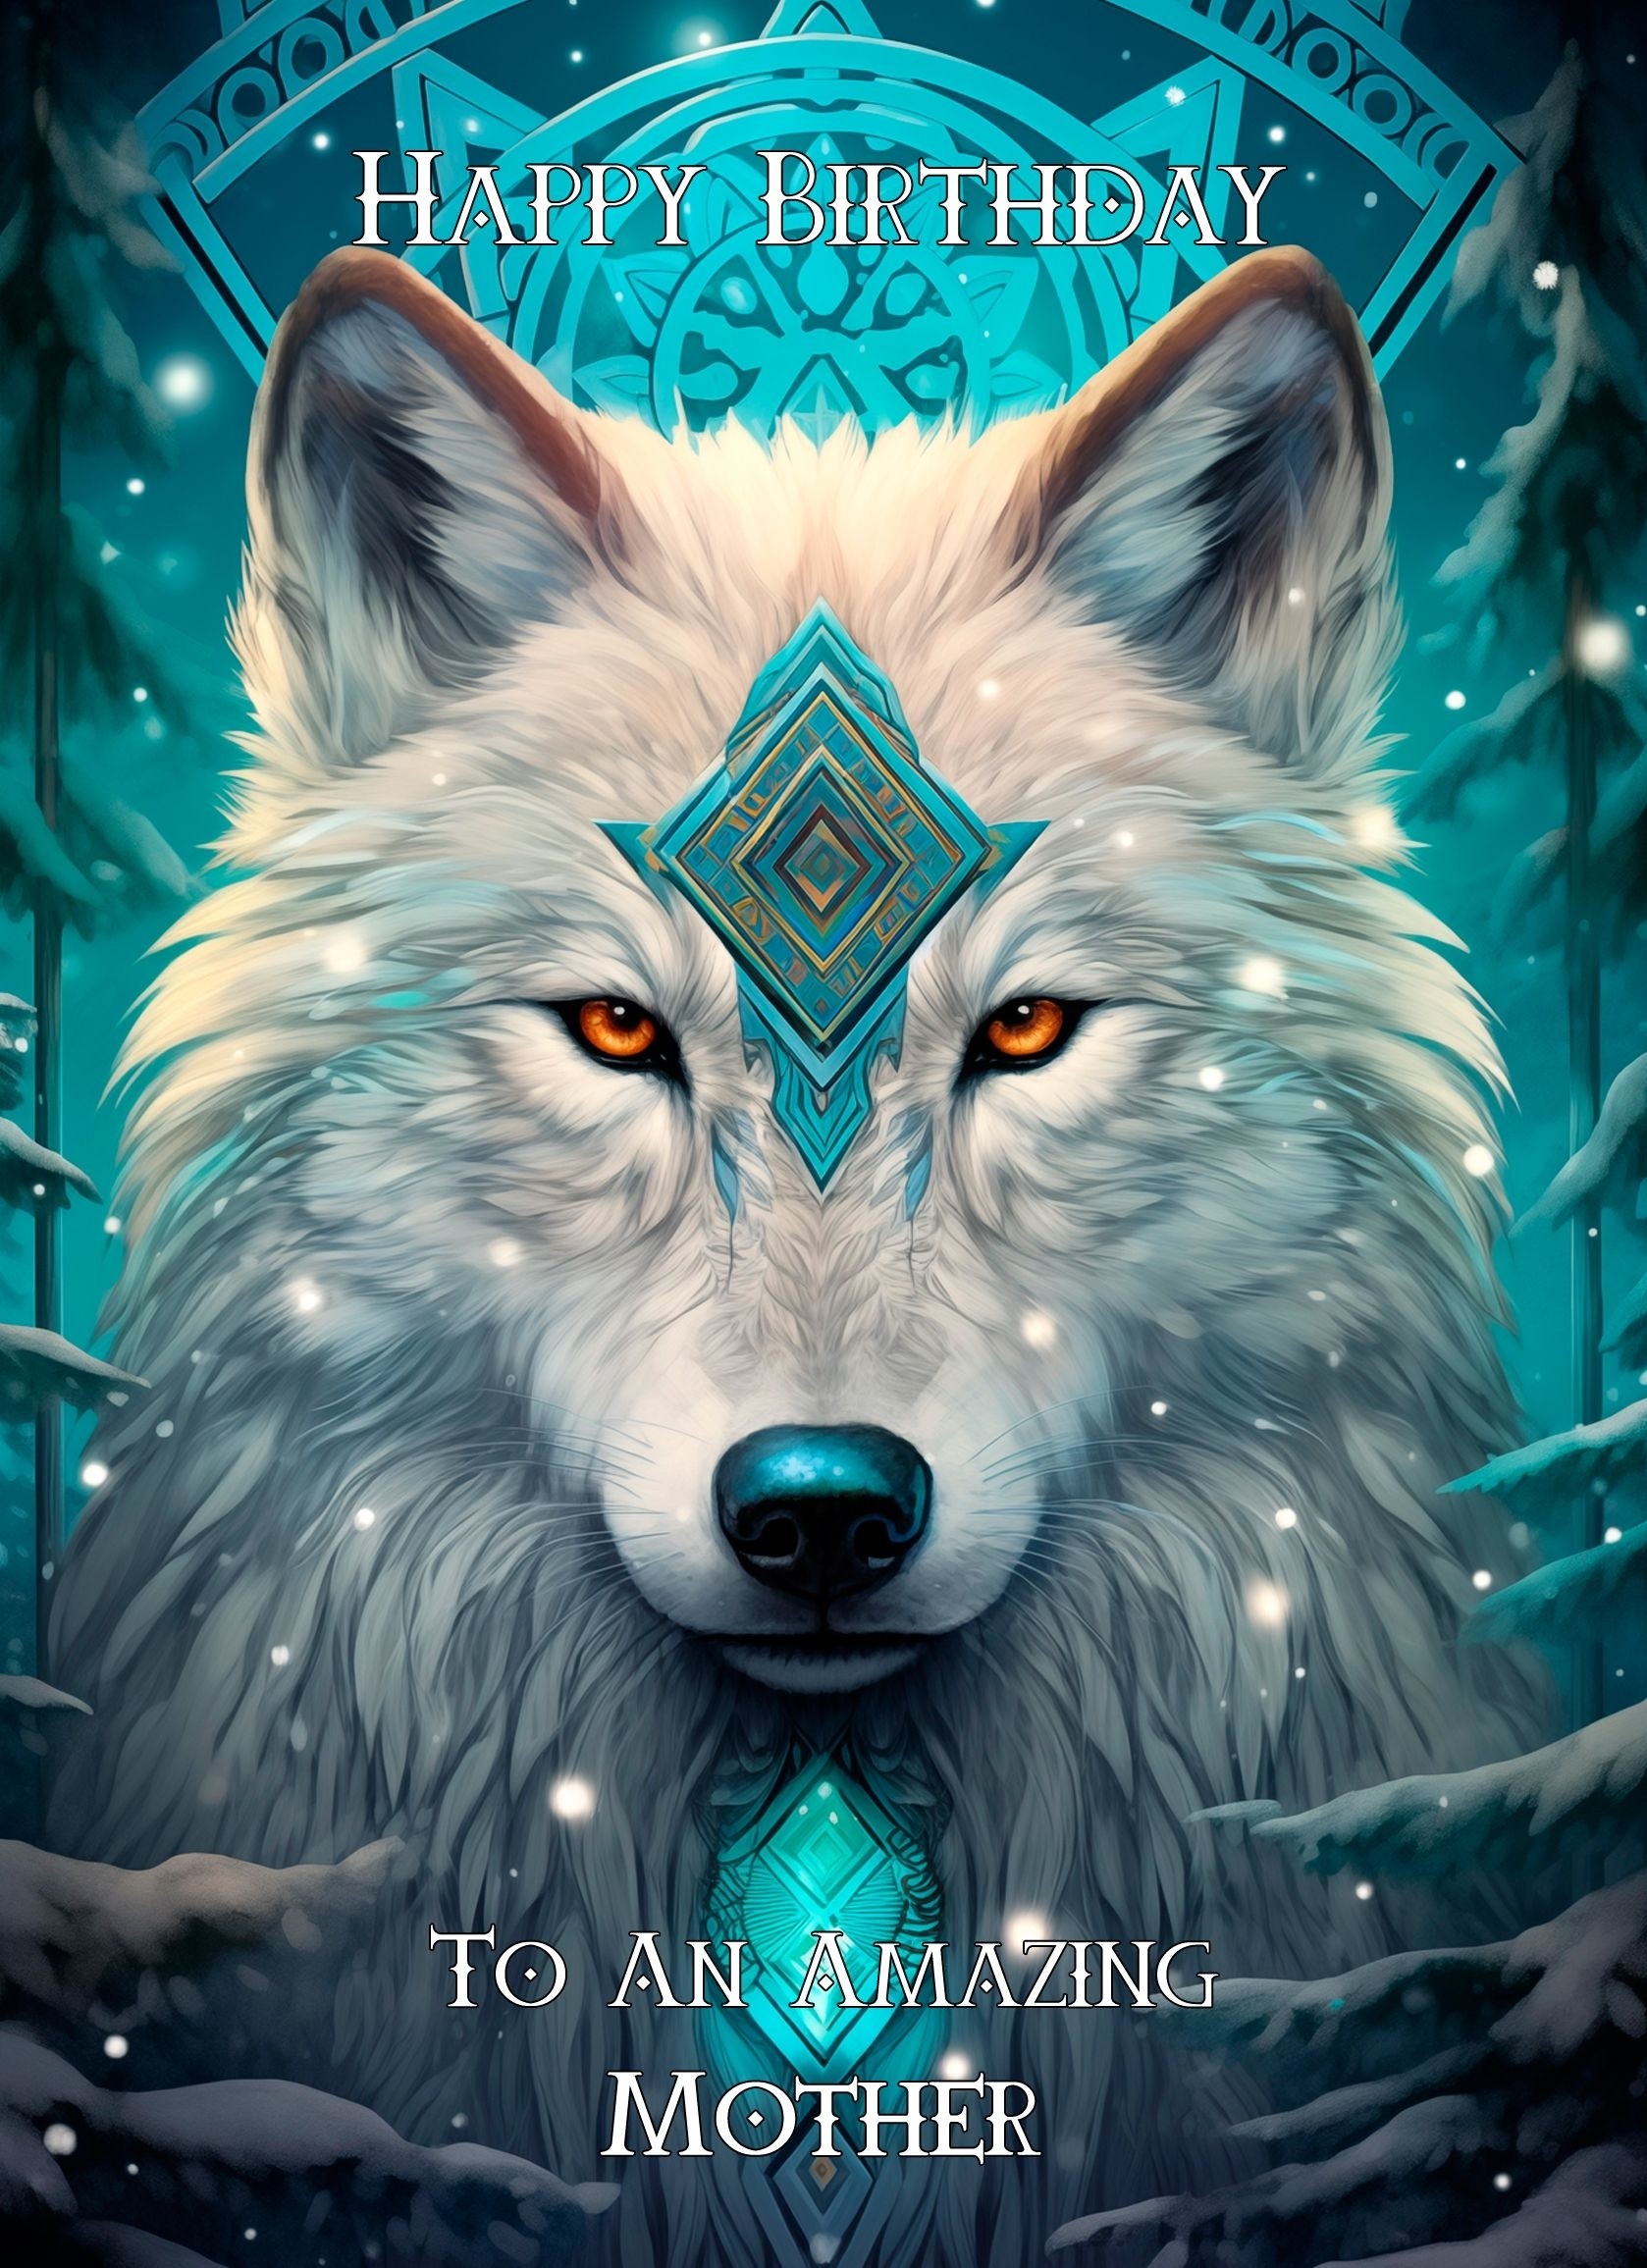 Tribal Wolf Art Birthday Card For Mother (Design 3)